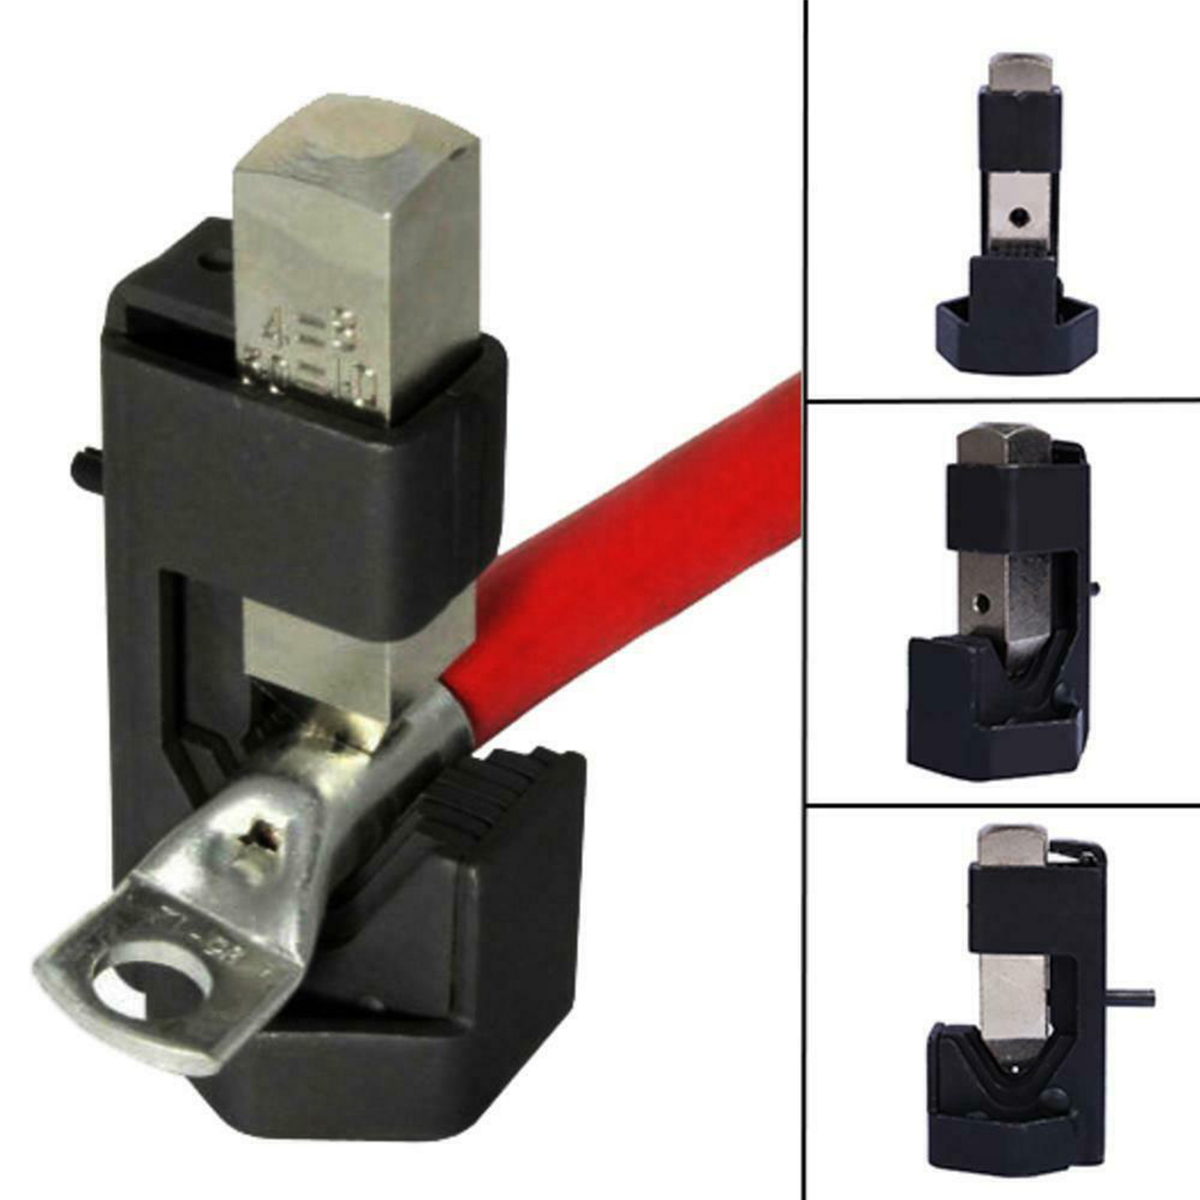 Hammer-On Welding Cable Lug Crimper Tool Great for Custom Battery Cables & More 